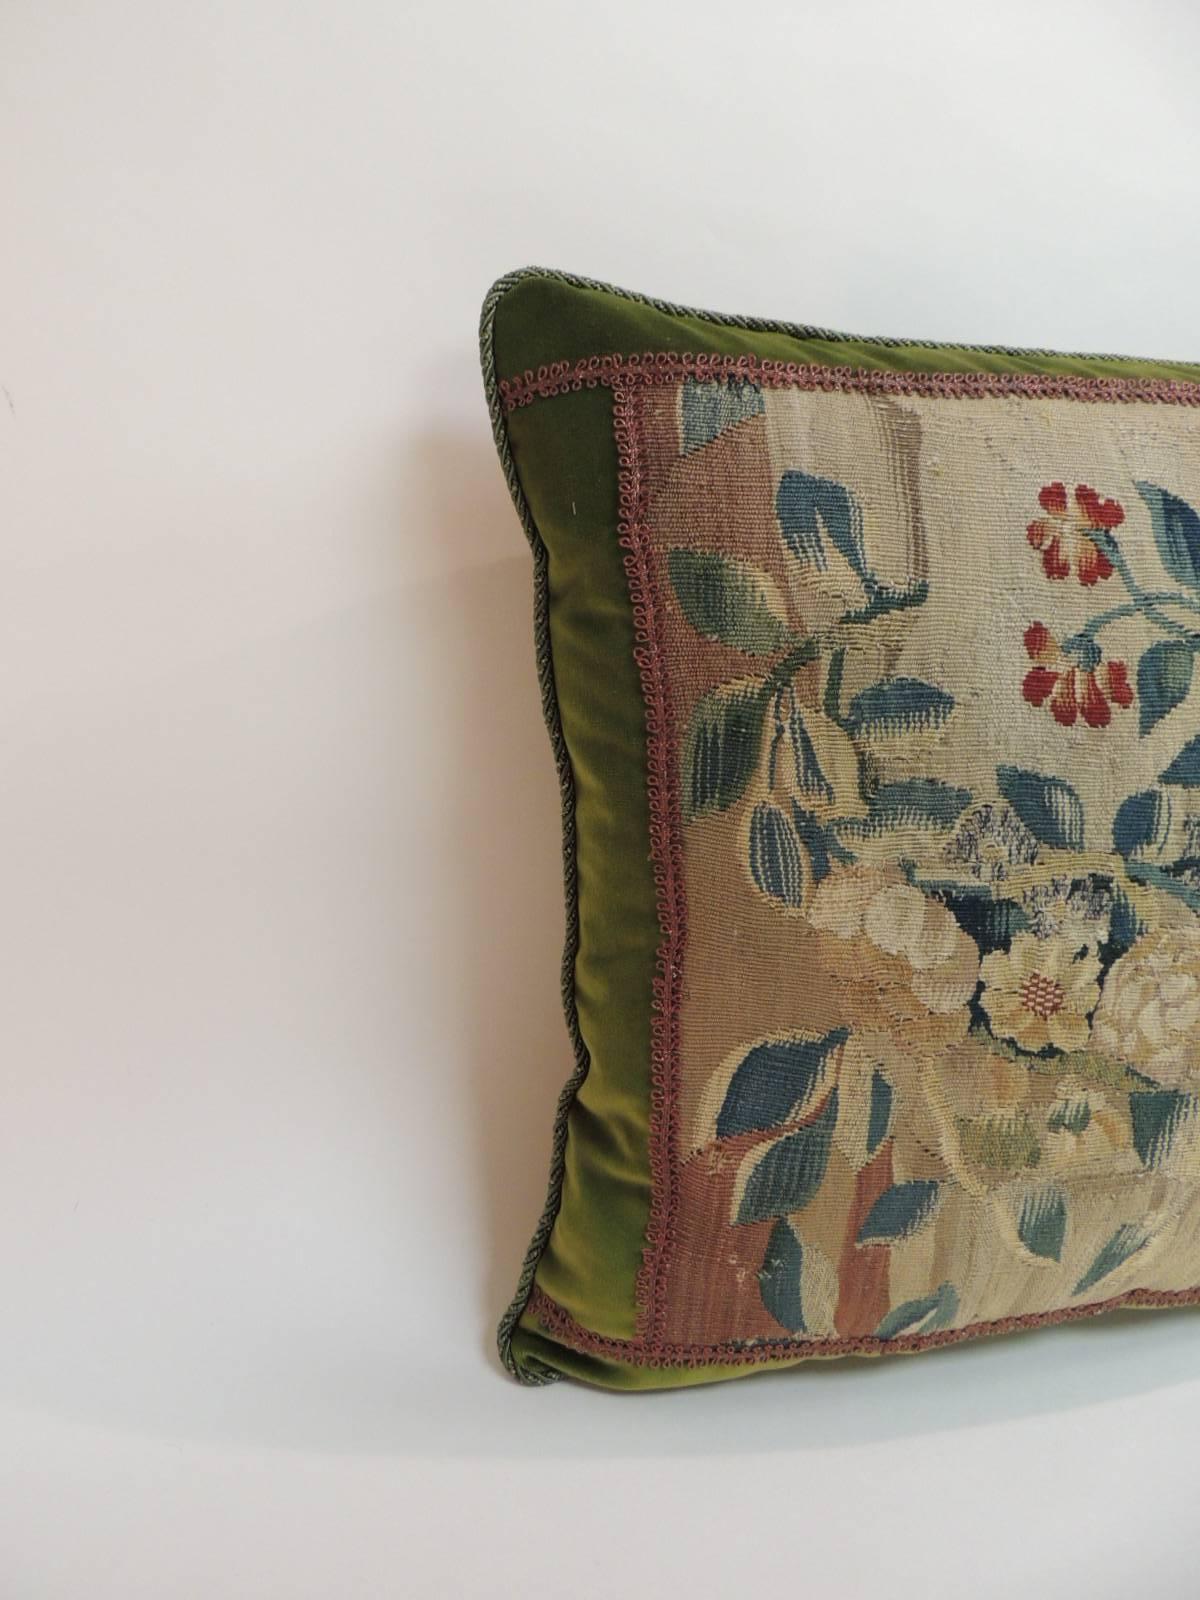 18th century decorative Aubusson tapestry pillow depicting a man framed with hunter green silk velvet, antique copper color metallic trim all around and rope trim at seams. In shades of green, copper, yellow, blue, red, orange and gold. Green silk